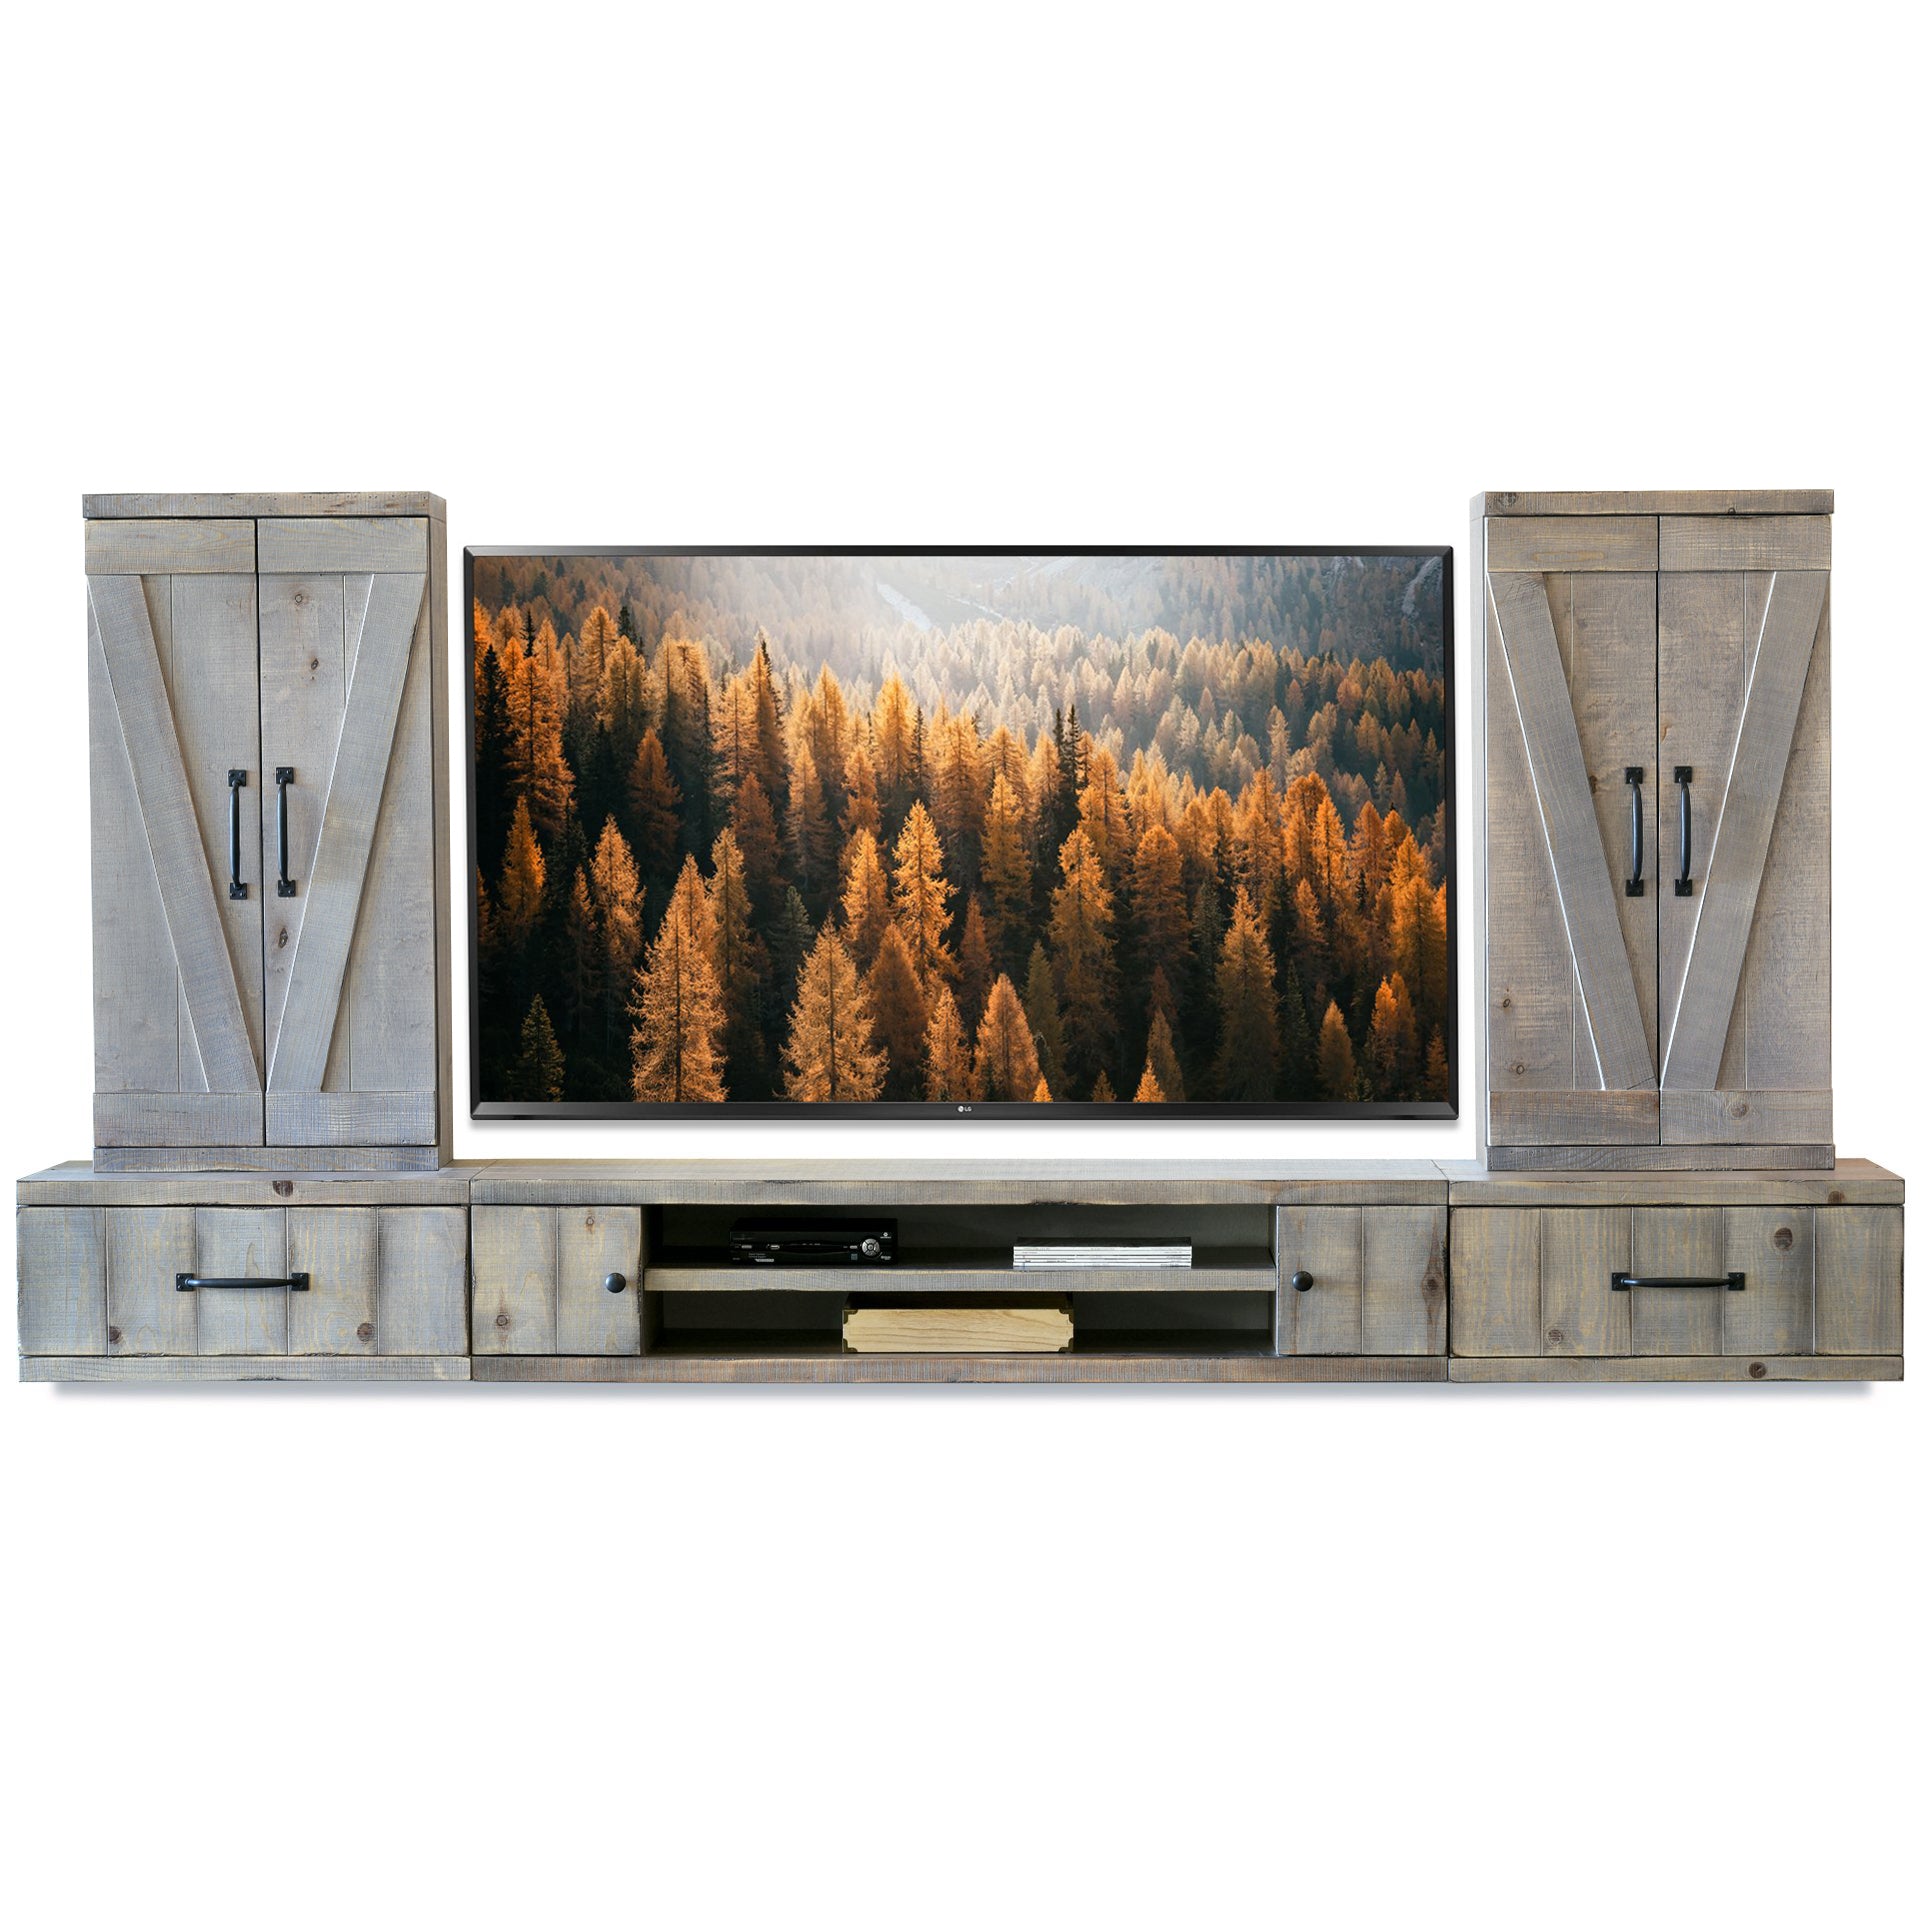 Floating TV Stand - Woodwaves - Rustic Floating Barn Door Entertainment Center - Farmhouse Collection - Lakewood Gray